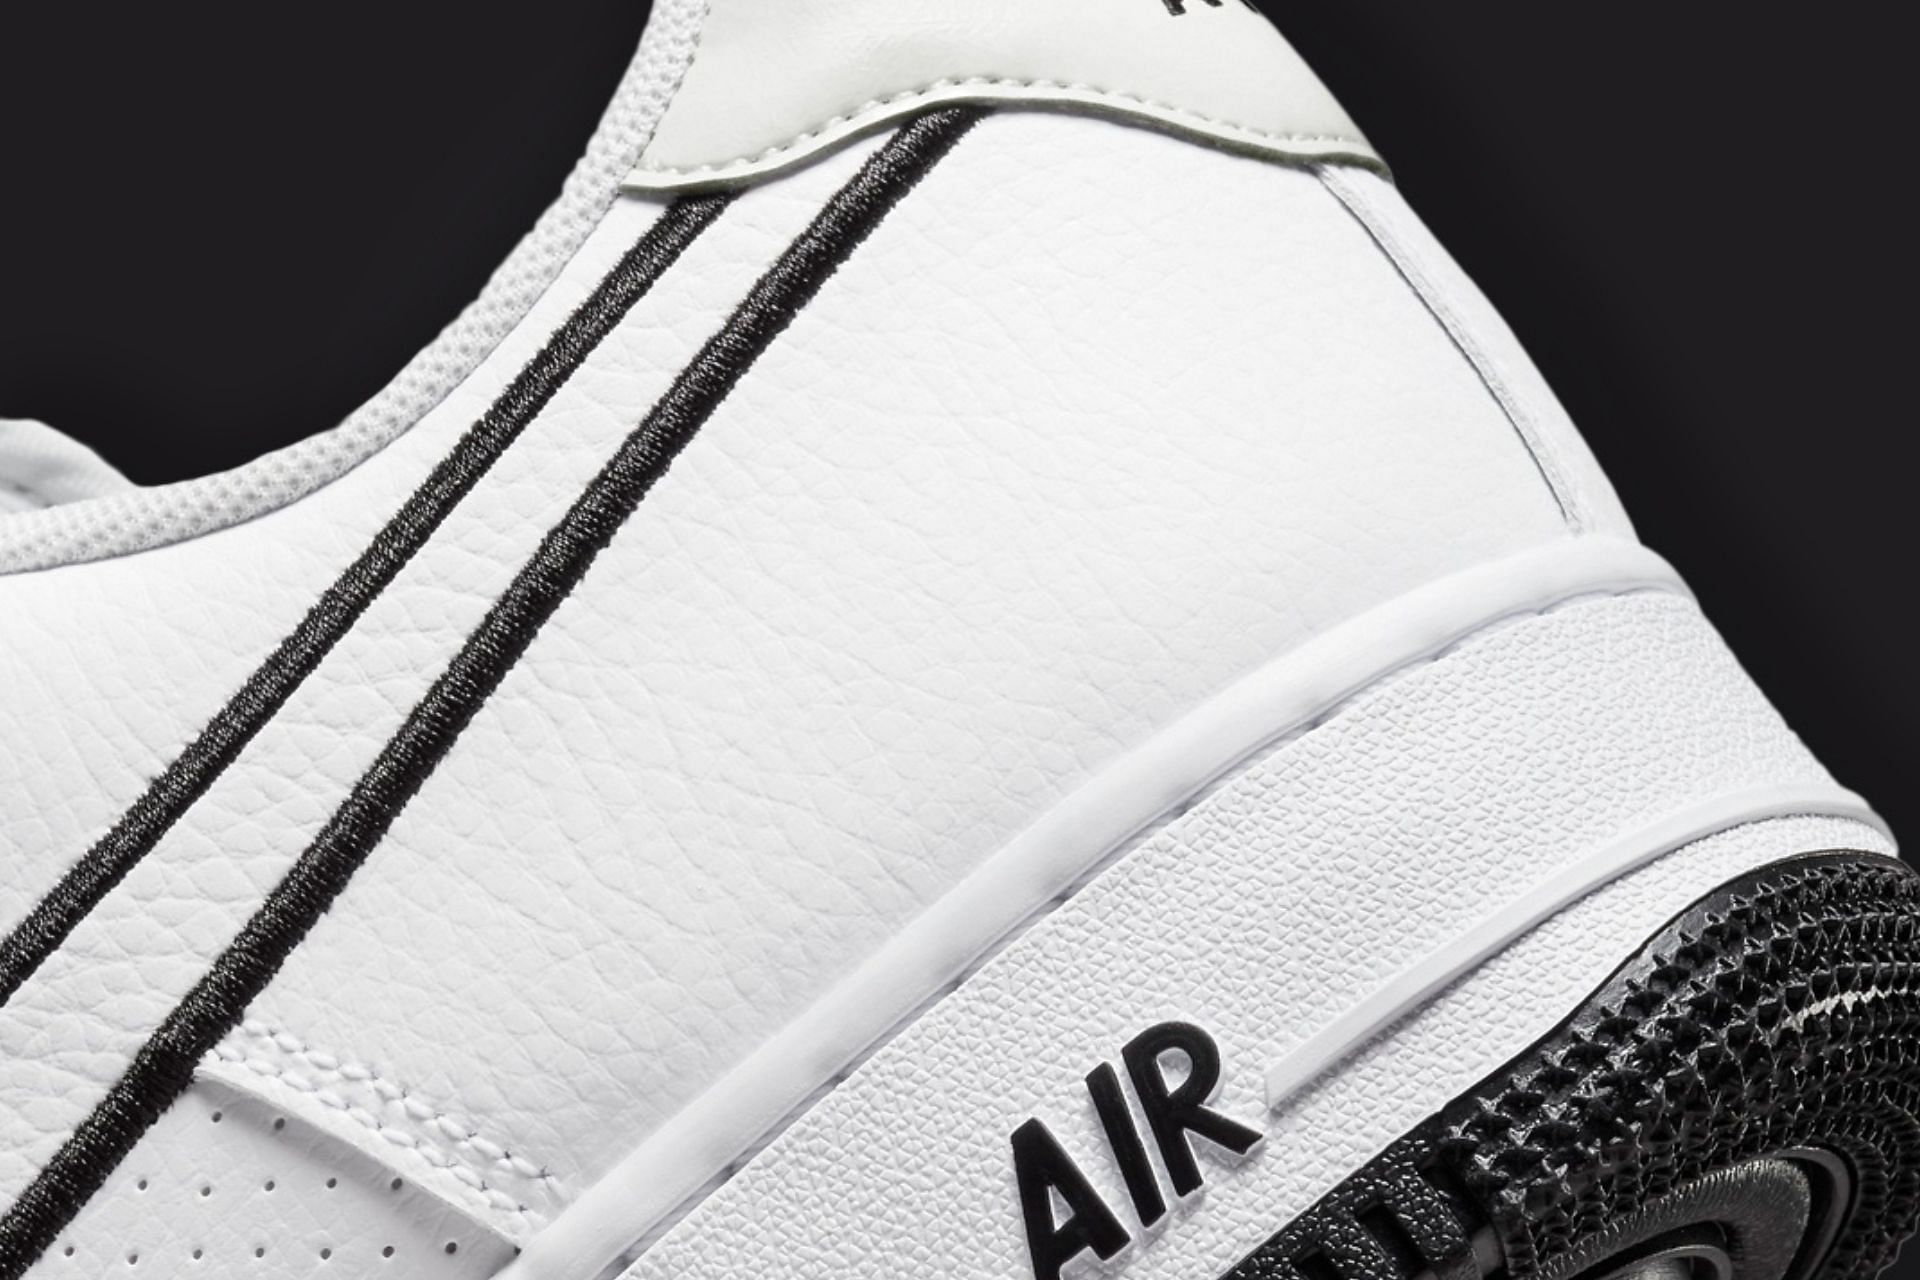 Take a closer look at the heel areas of the shoes (Image via Nike)